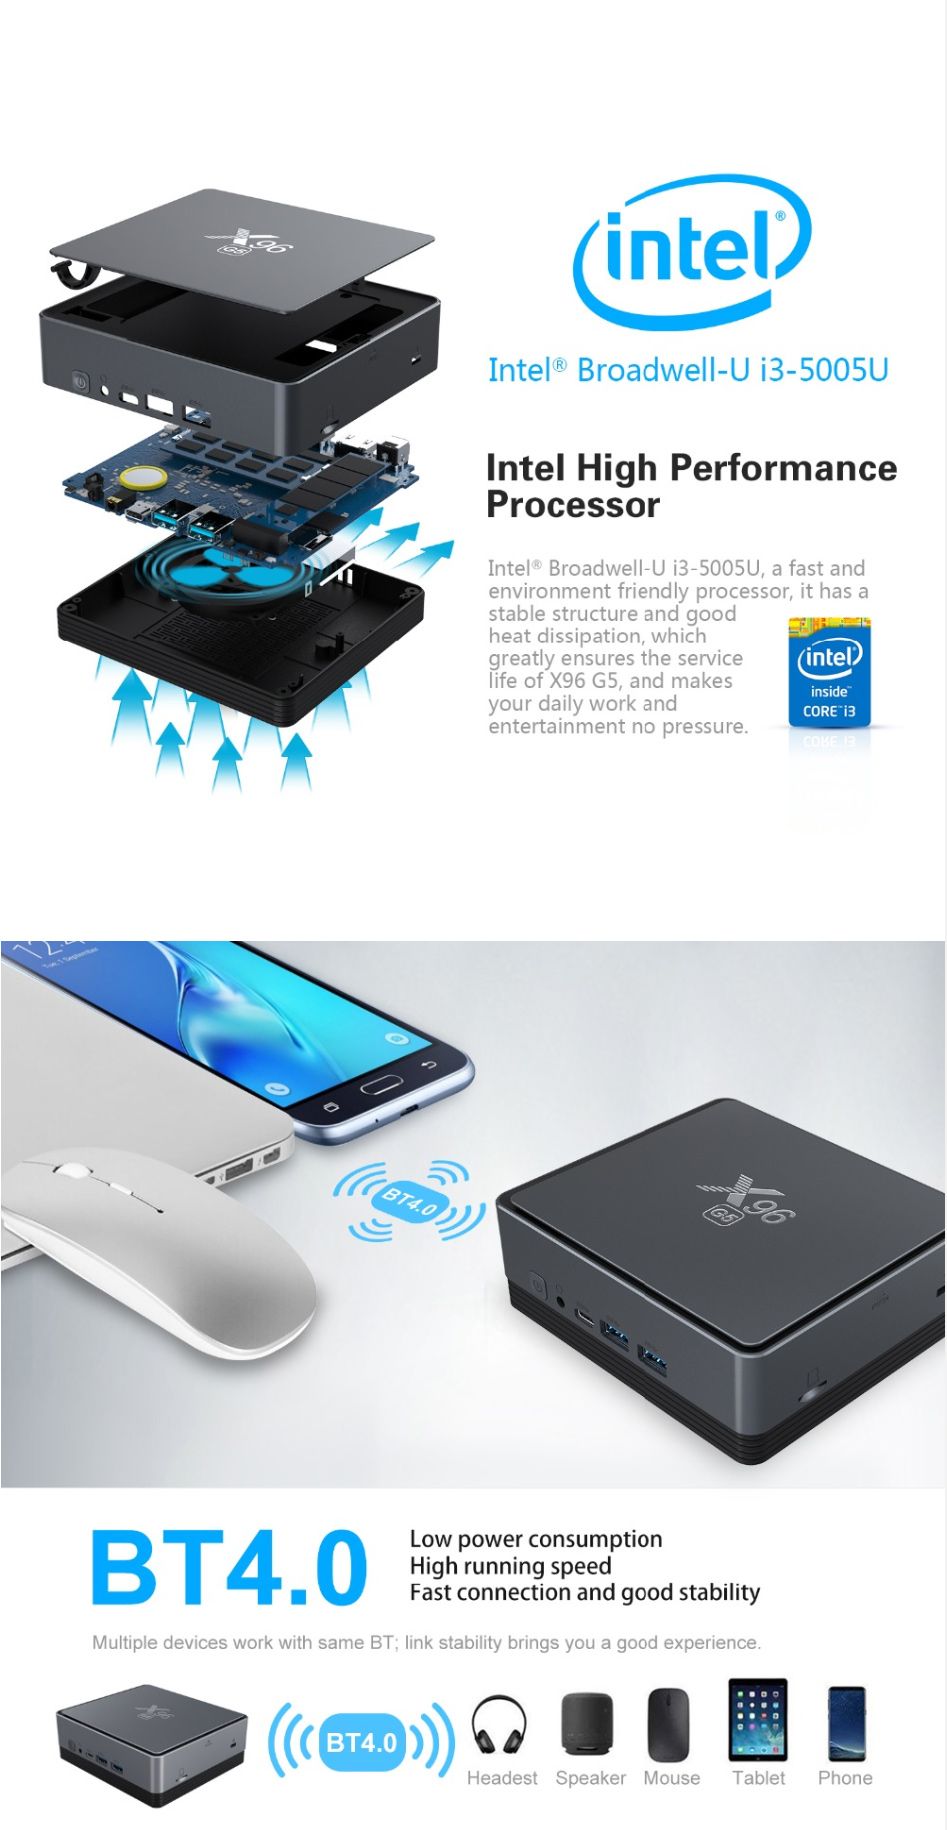 X96-G5-i3-5005U-8GB-ROM-128GB-SSD-5G-WIFI-bluetooth-40-1000M-LAN-Mini-PC-Support-Windows-10-Support--1622155